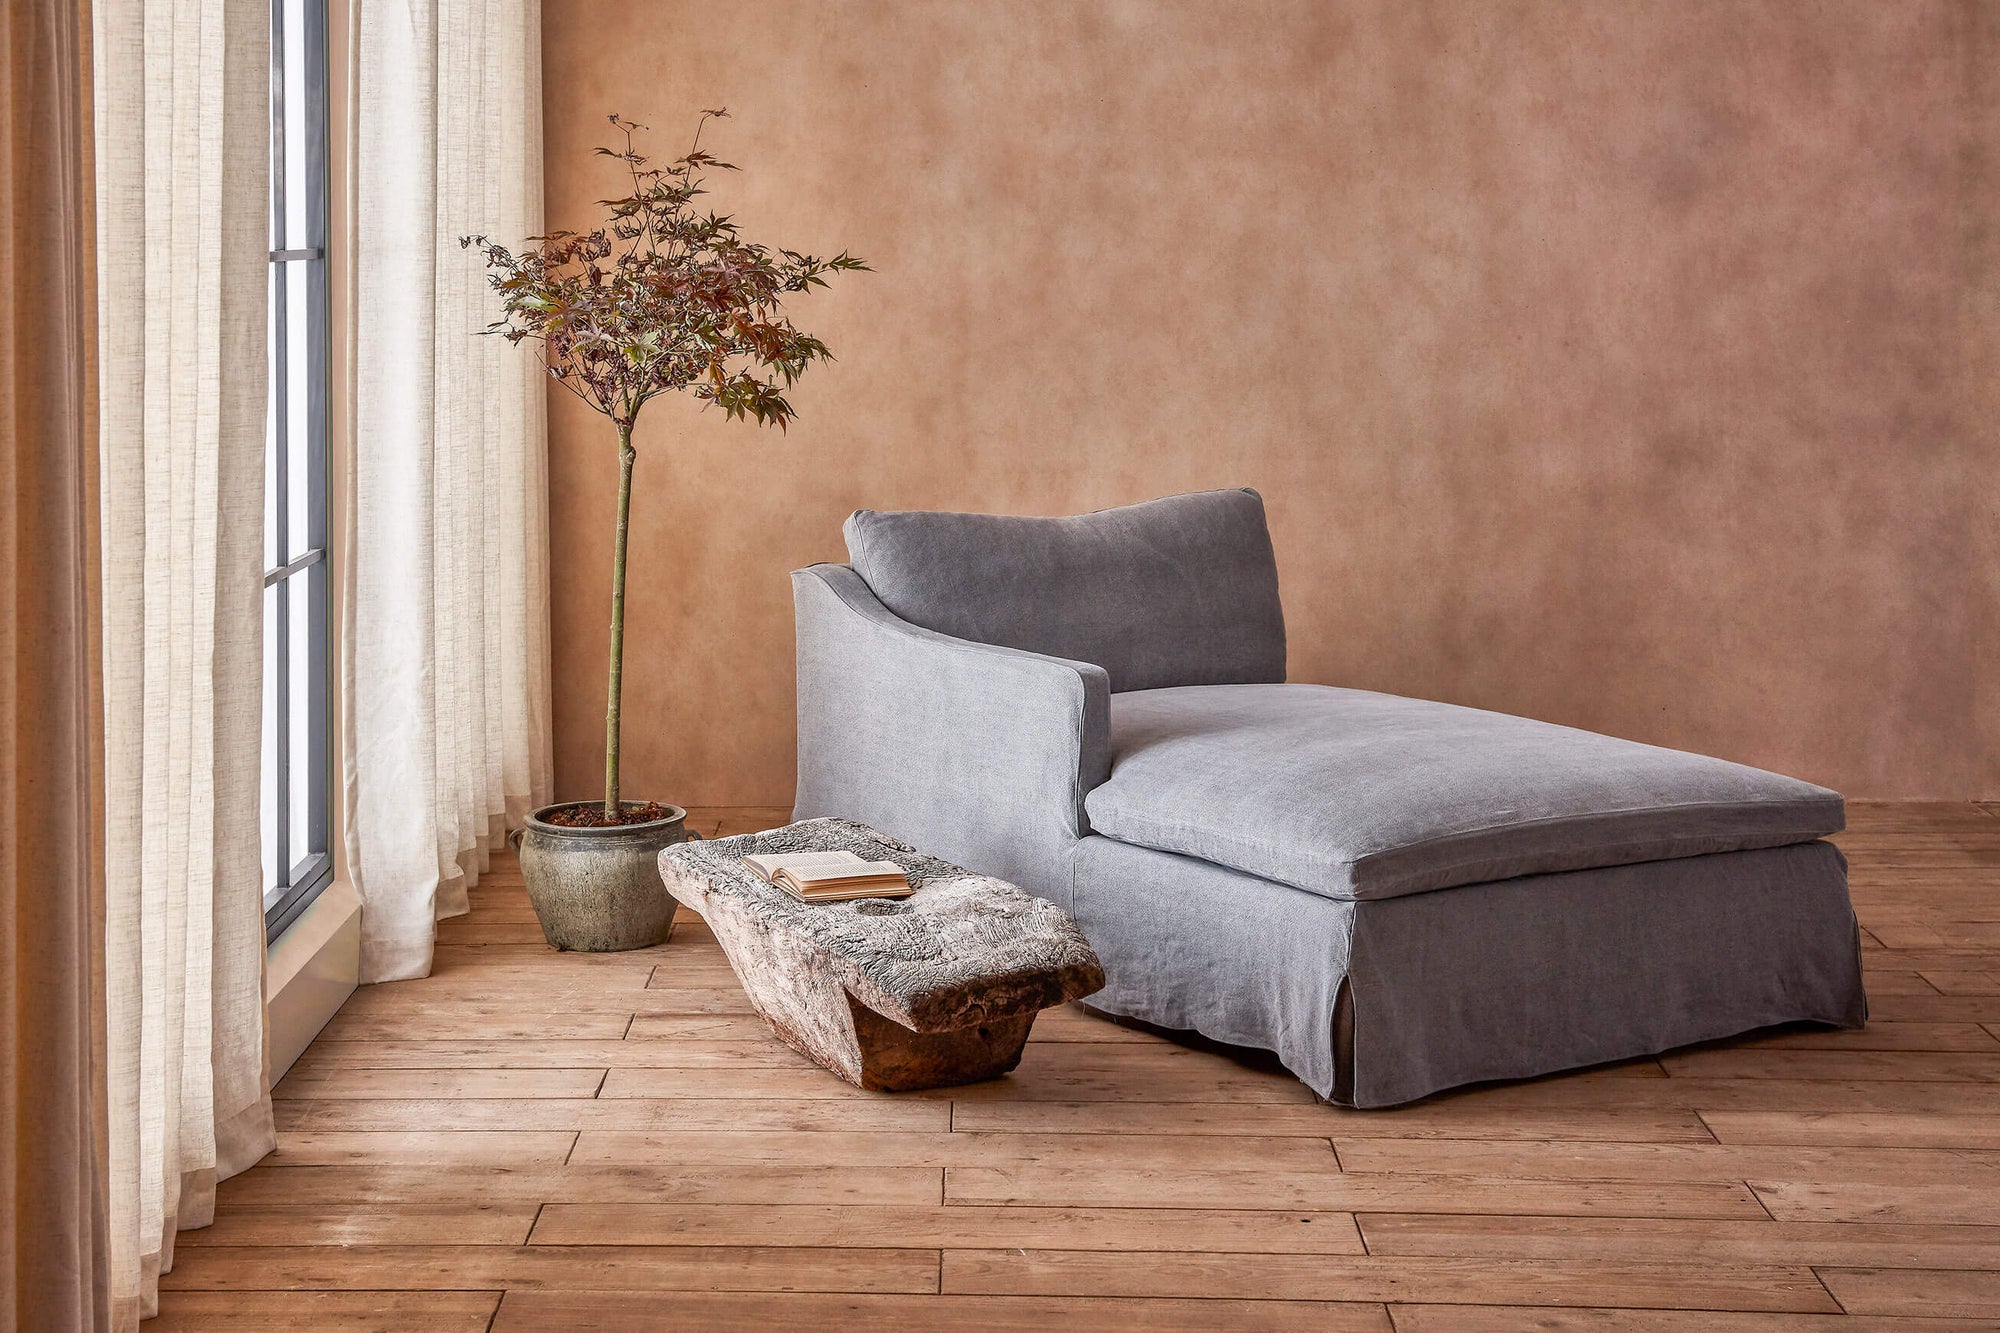 Amelia Left Arm Facing Daybed in Ink Cap, a medium cool grey Light Weight Linen, placed in a sunlit room next to a side table and potted tree